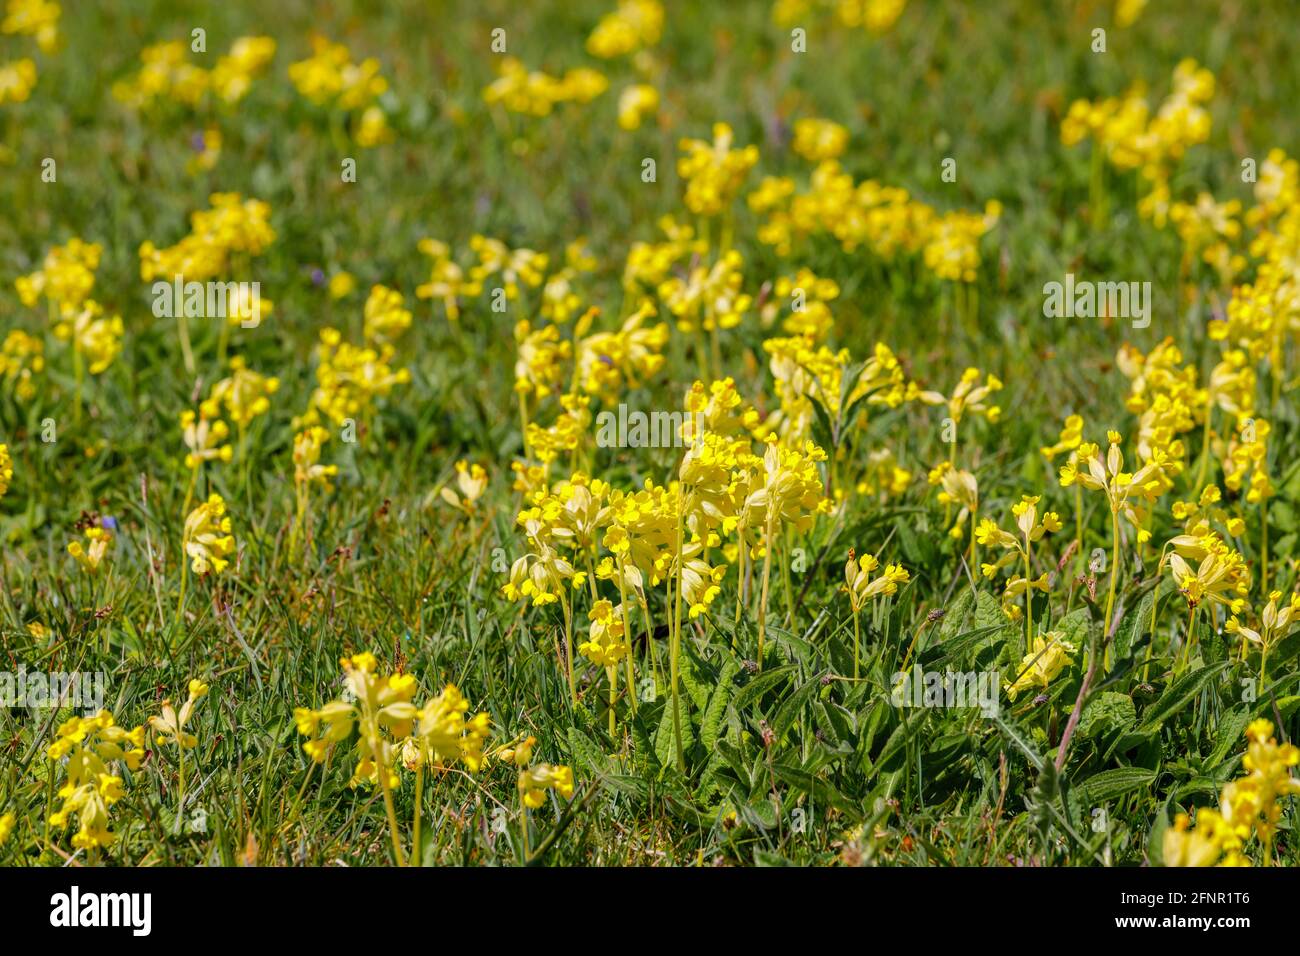 A thick carpet of densely growing Yellow cowslips (Primula veris) flowering in grass in a field in Surrey, south-east England in spring Stock Photo